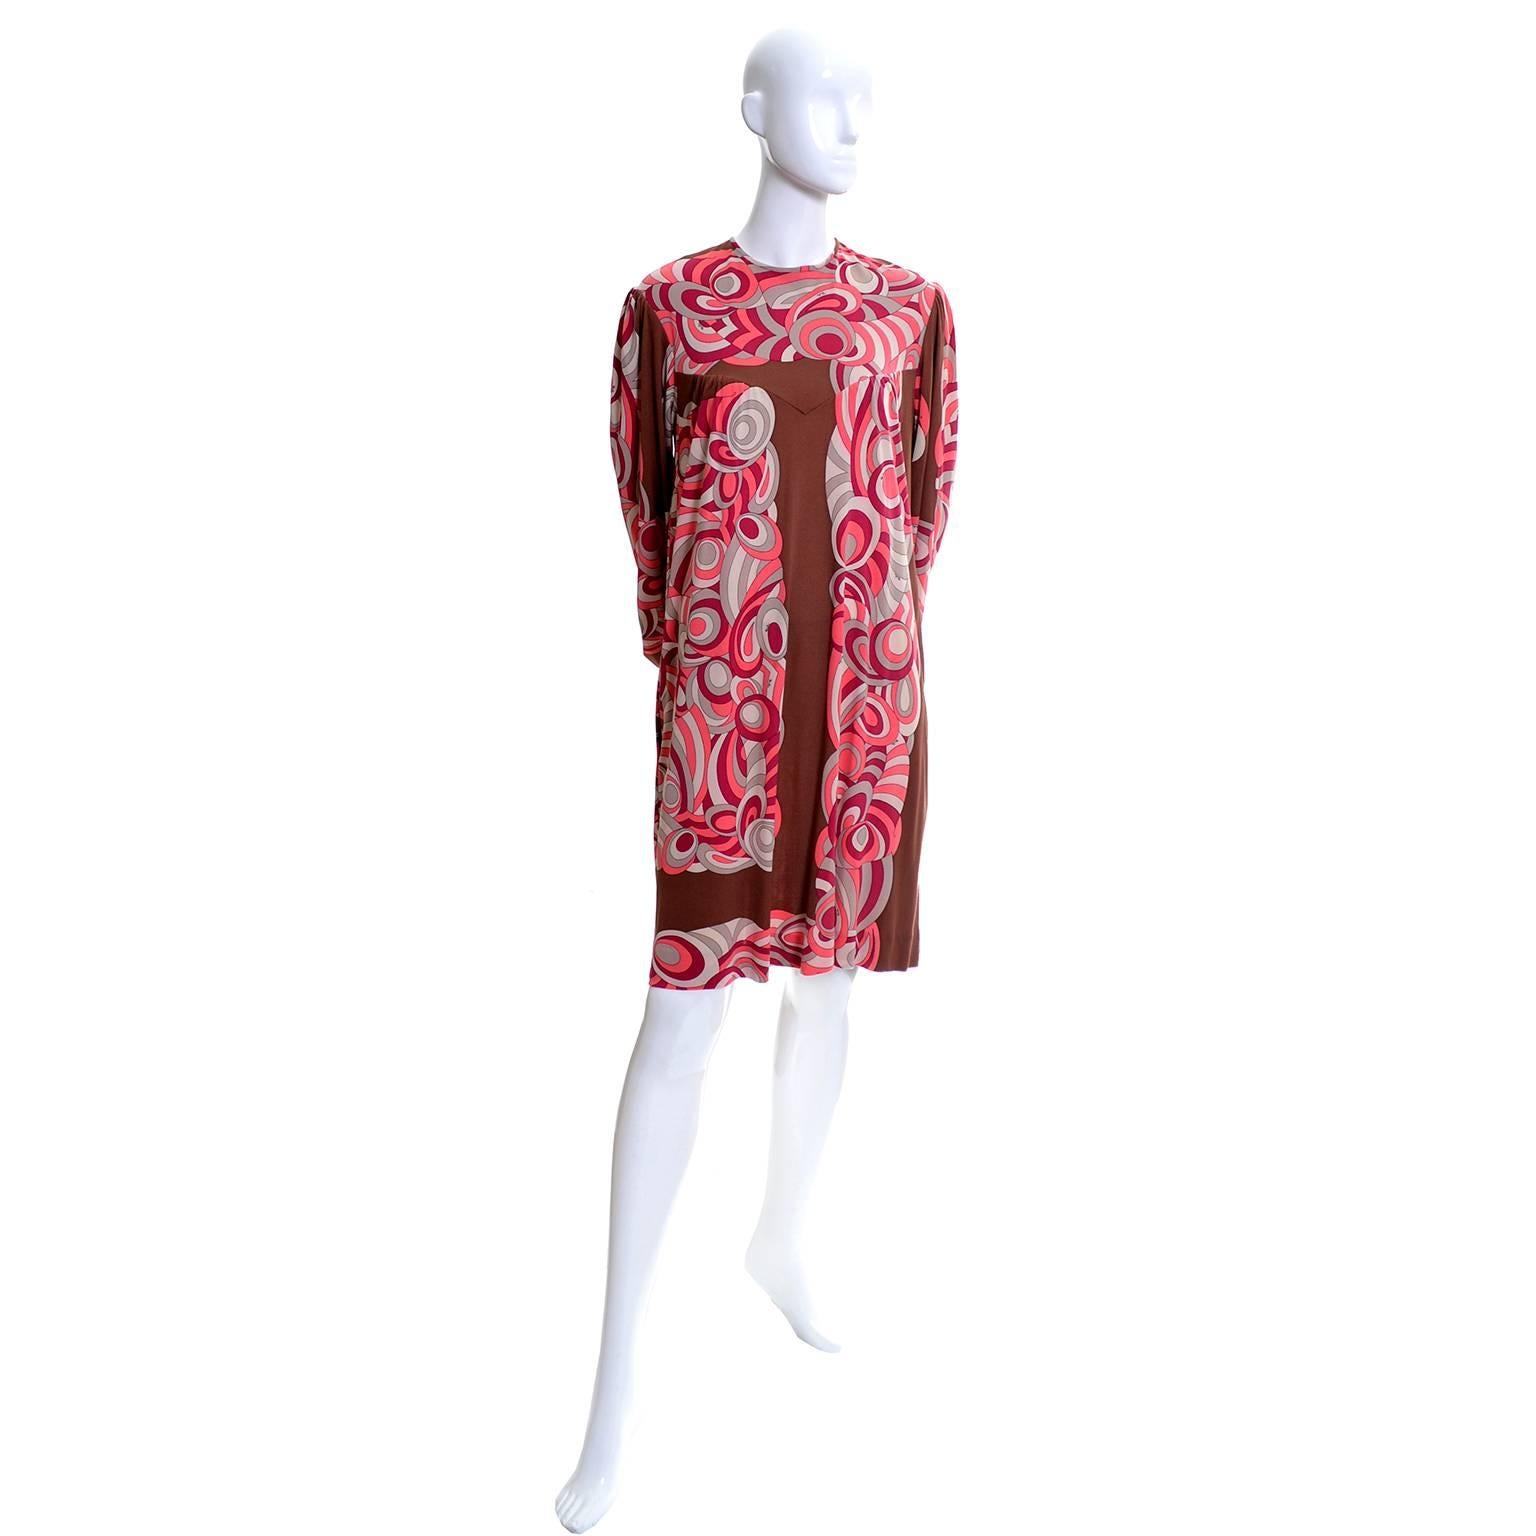 This fab vintage silk jersey Emilio Pucci 1970's dress came from the estate of a woman who knew Emilio Pucci and often visited him at his home in Italy.  The dress is in a brown and raspberry pinky red, coral and gray iconic Pucci design.  This fun